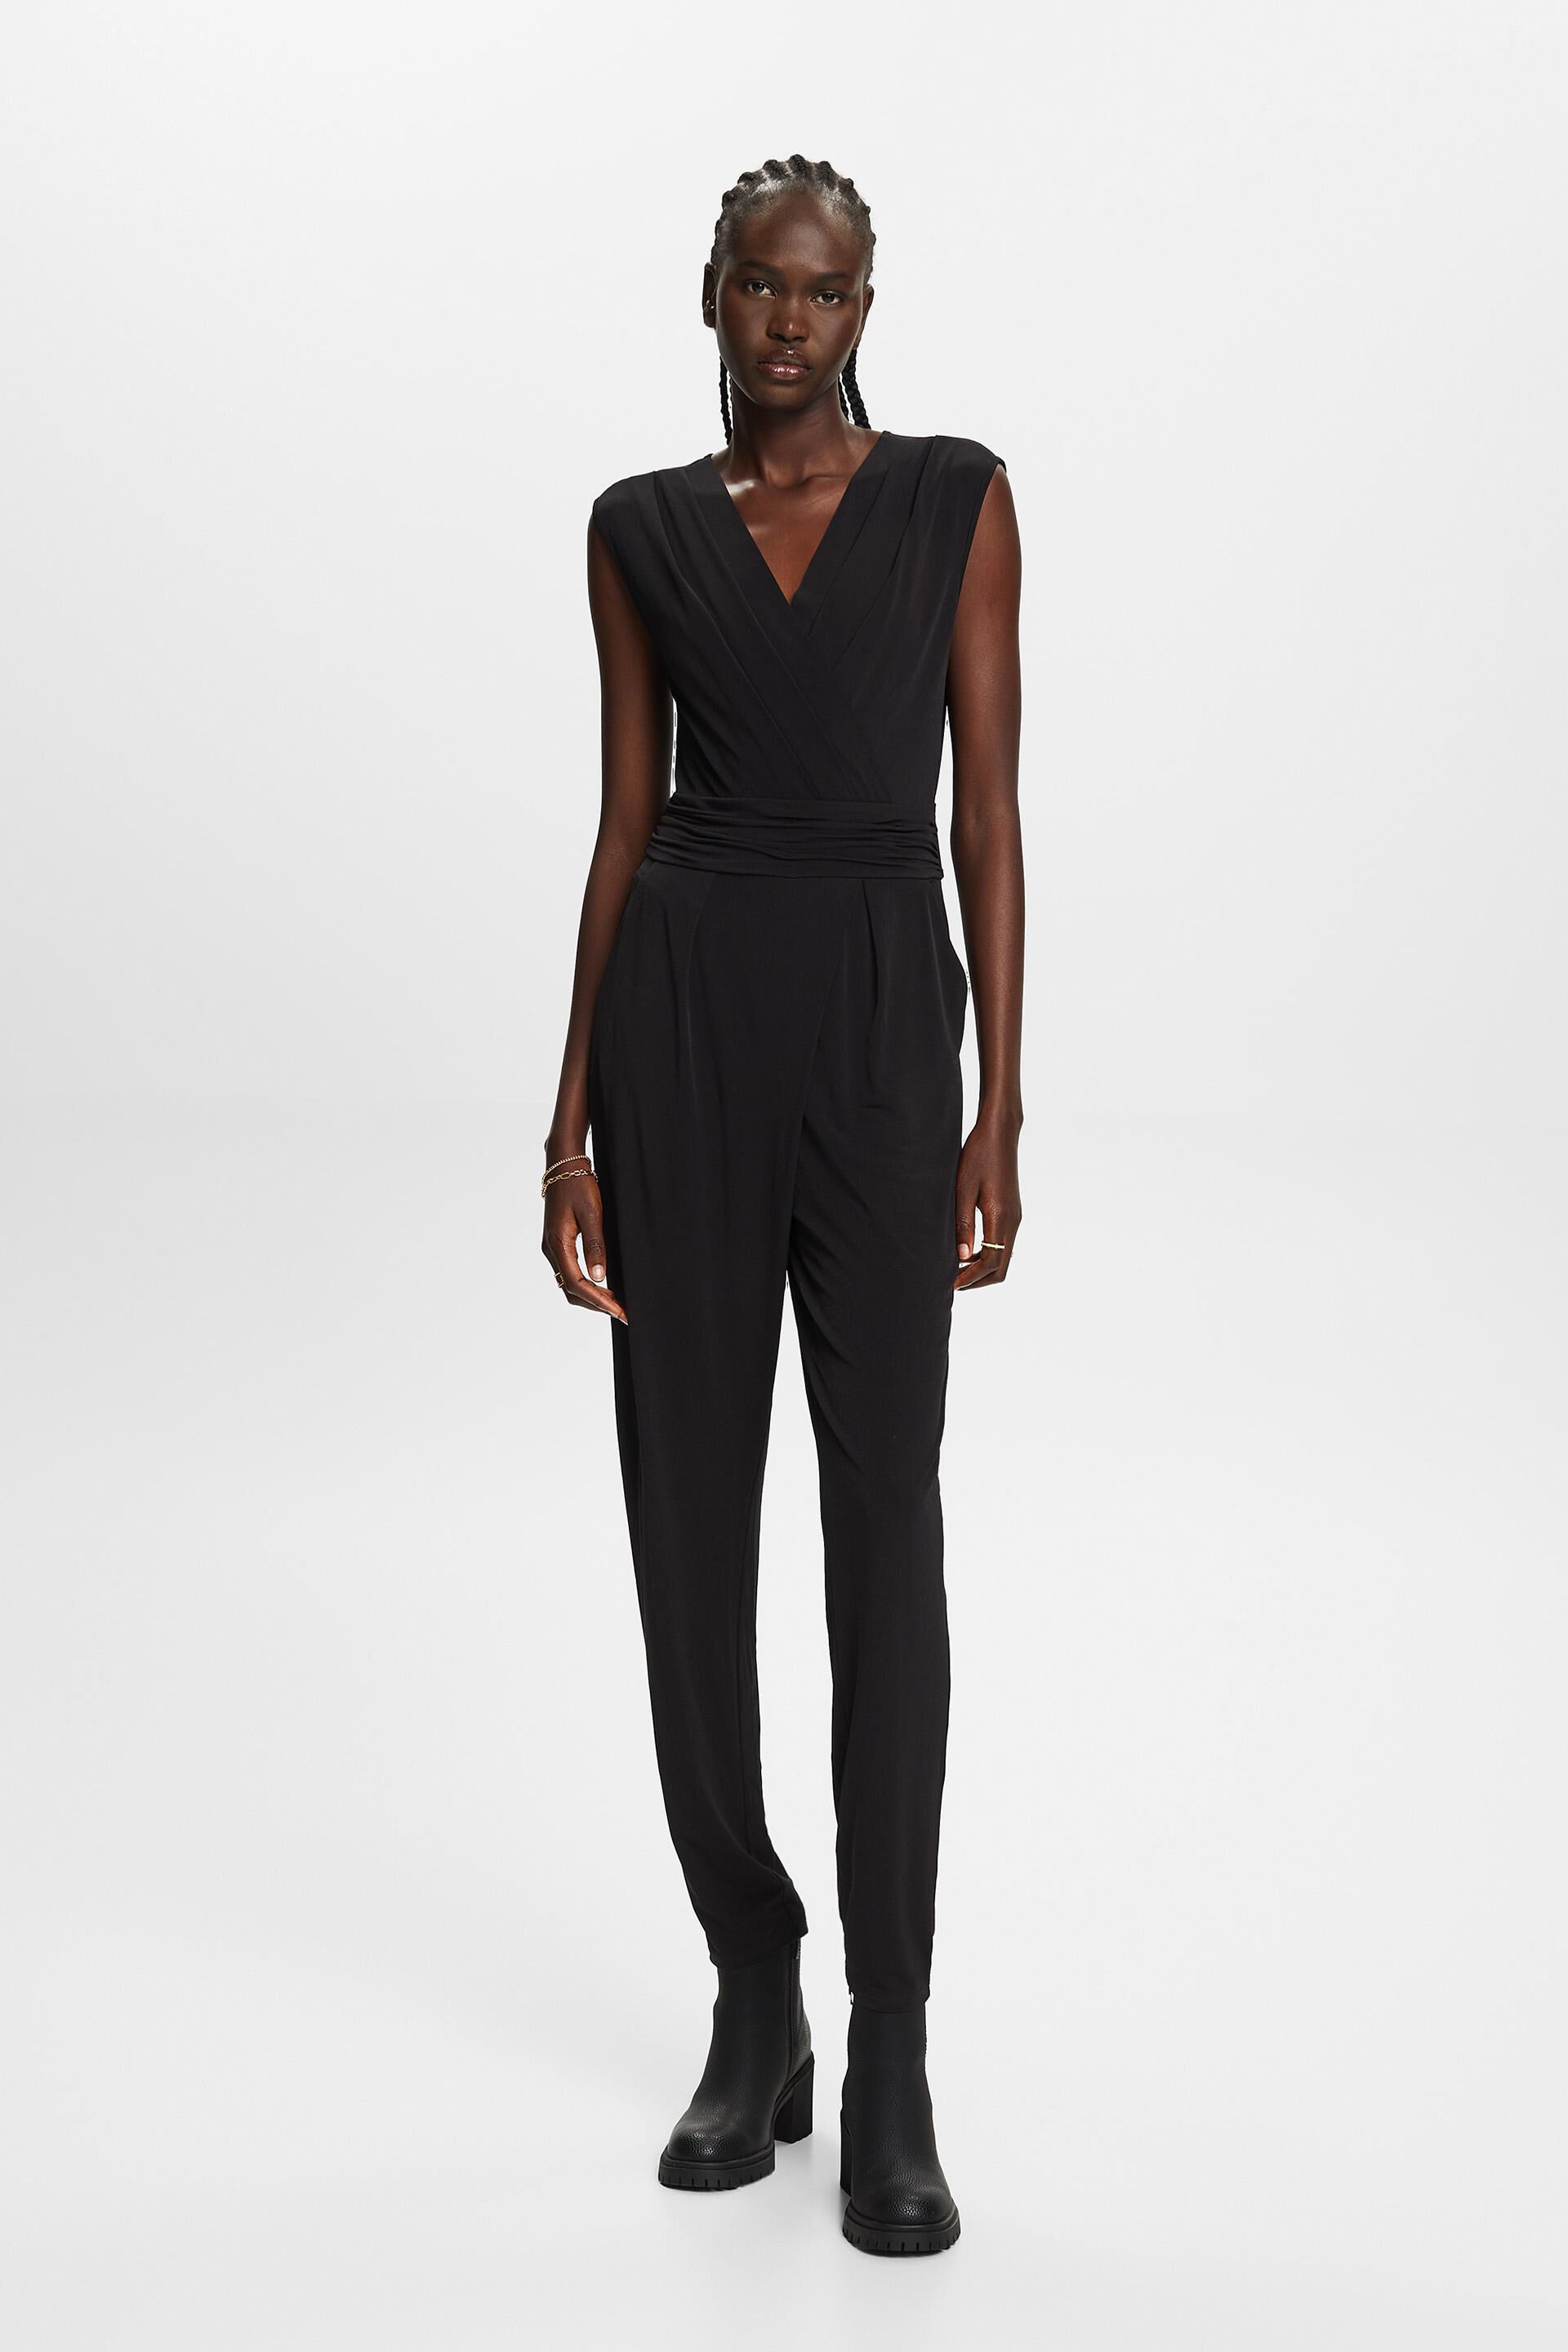 ESPRIT Sleeveless Jumpsuit With Wrapped Neckline At Our, 50% OFF